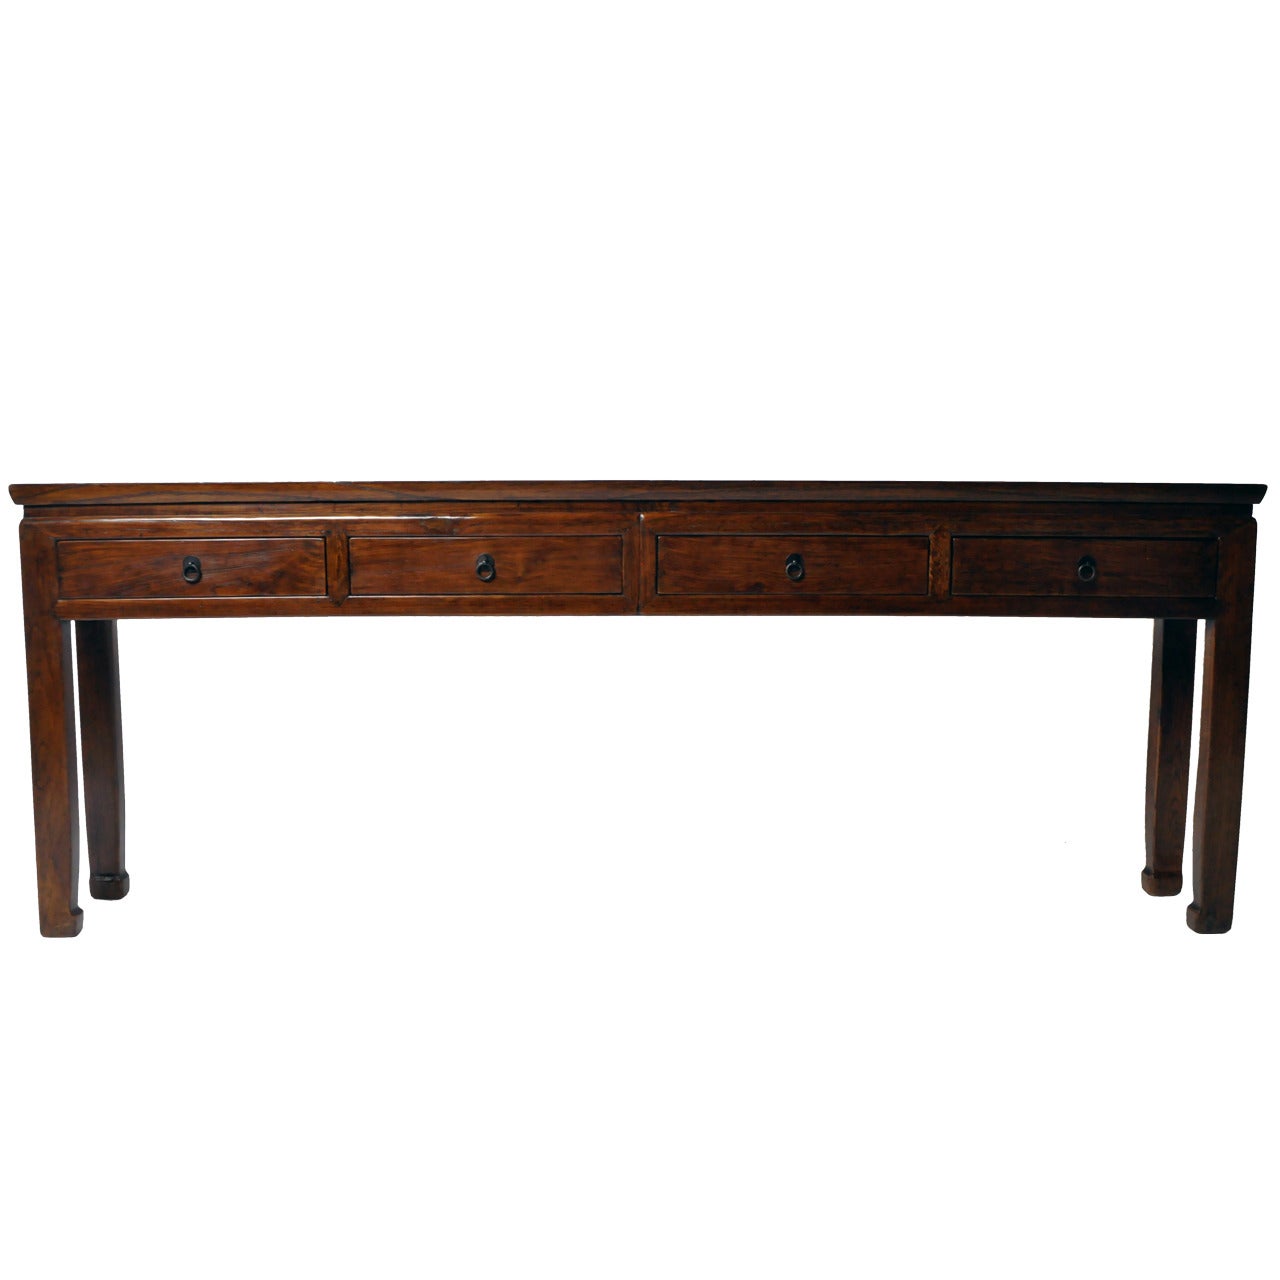 19th Century Console Table with 4 Drawers